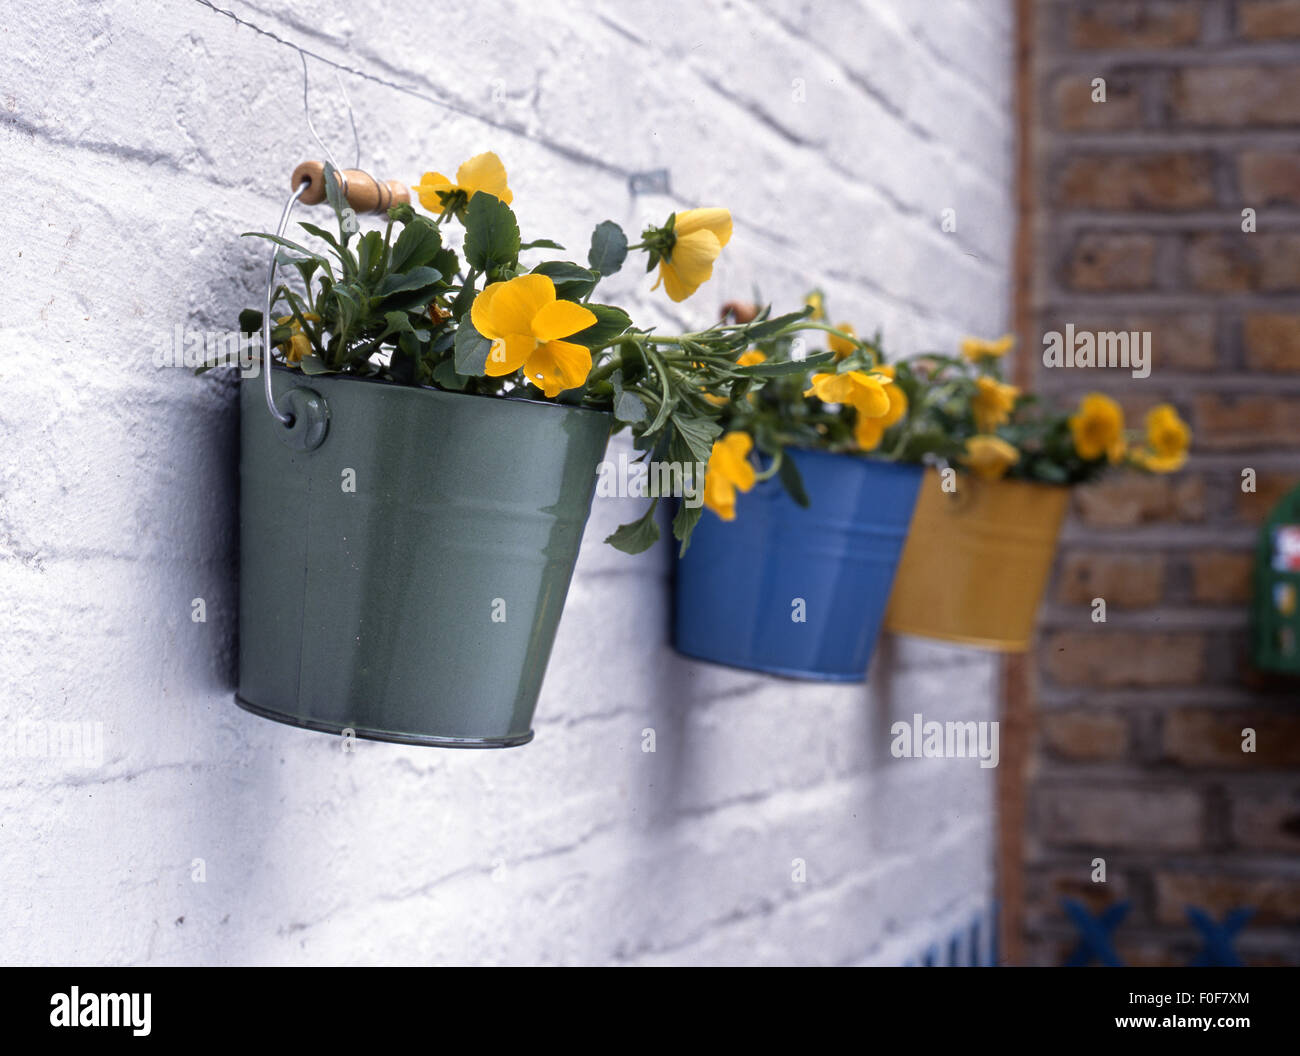 https://c8.alamy.com/comp/F0F7XM/metal-painted-flower-buckets-in-greenblue-and-yellow-F0F7XM.jpg